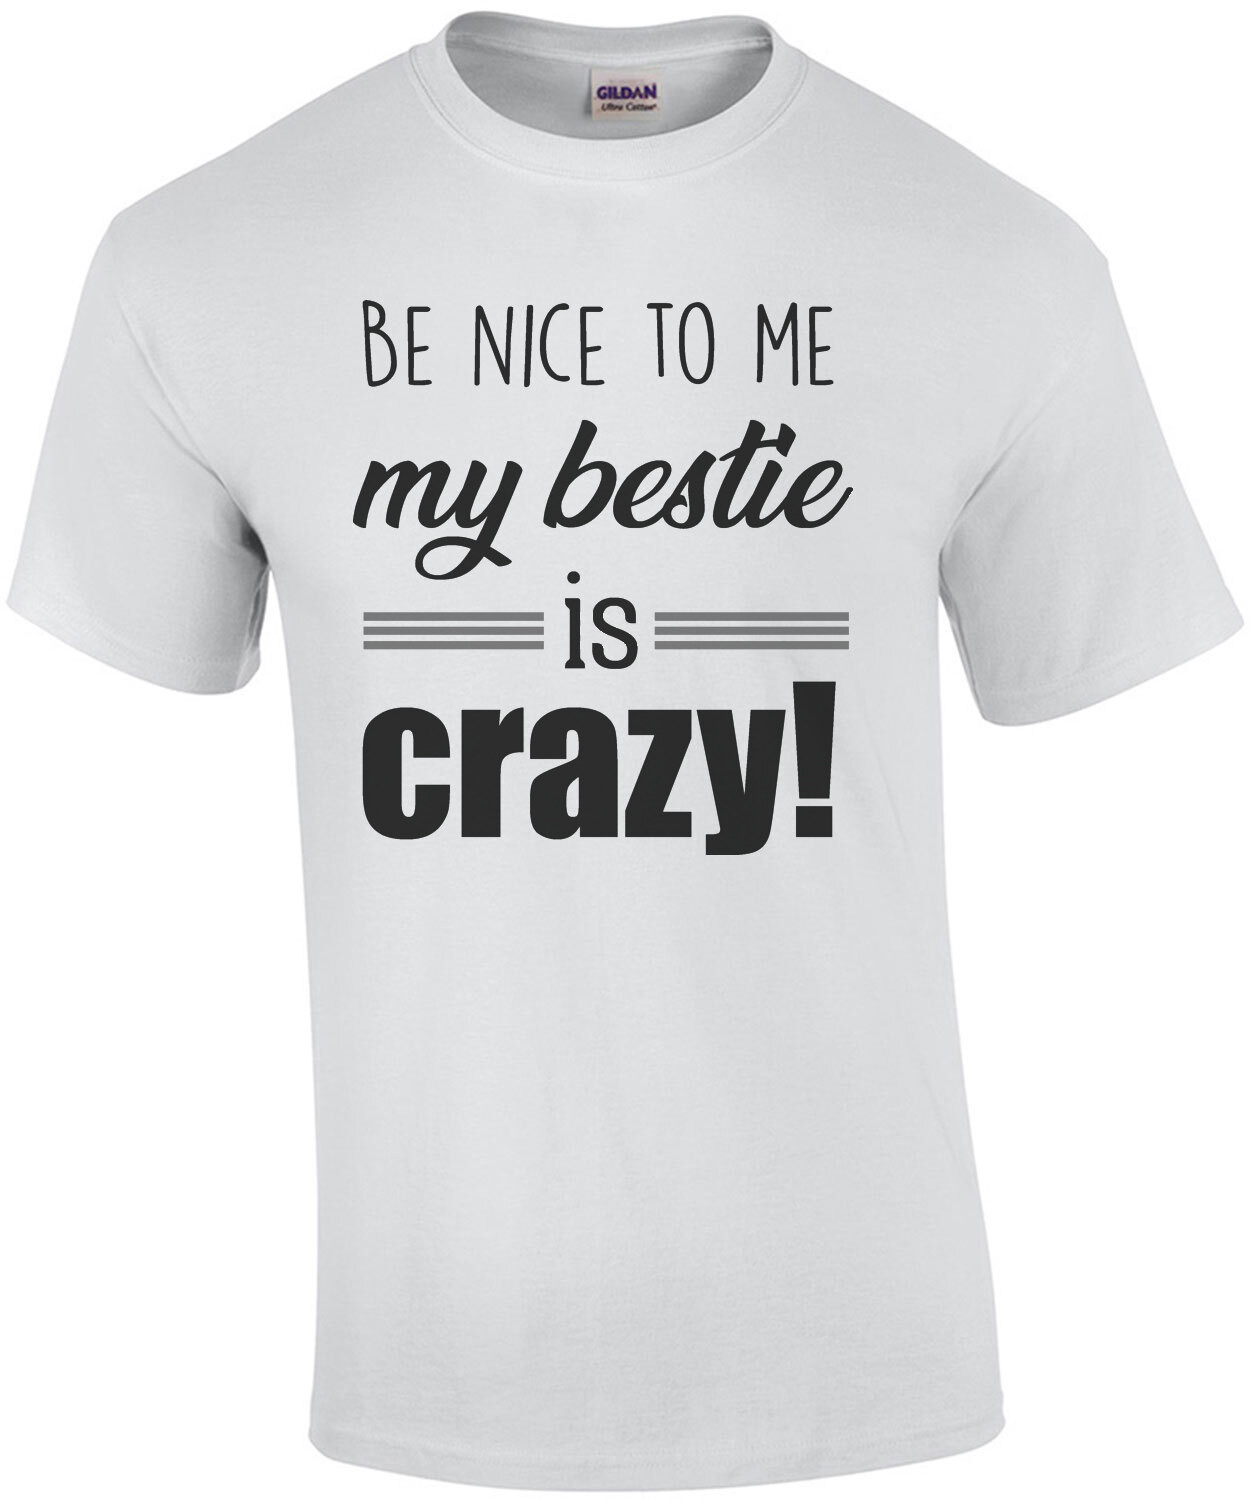 Be nice to me - my bestie is crazy! funny ladies t-shirt